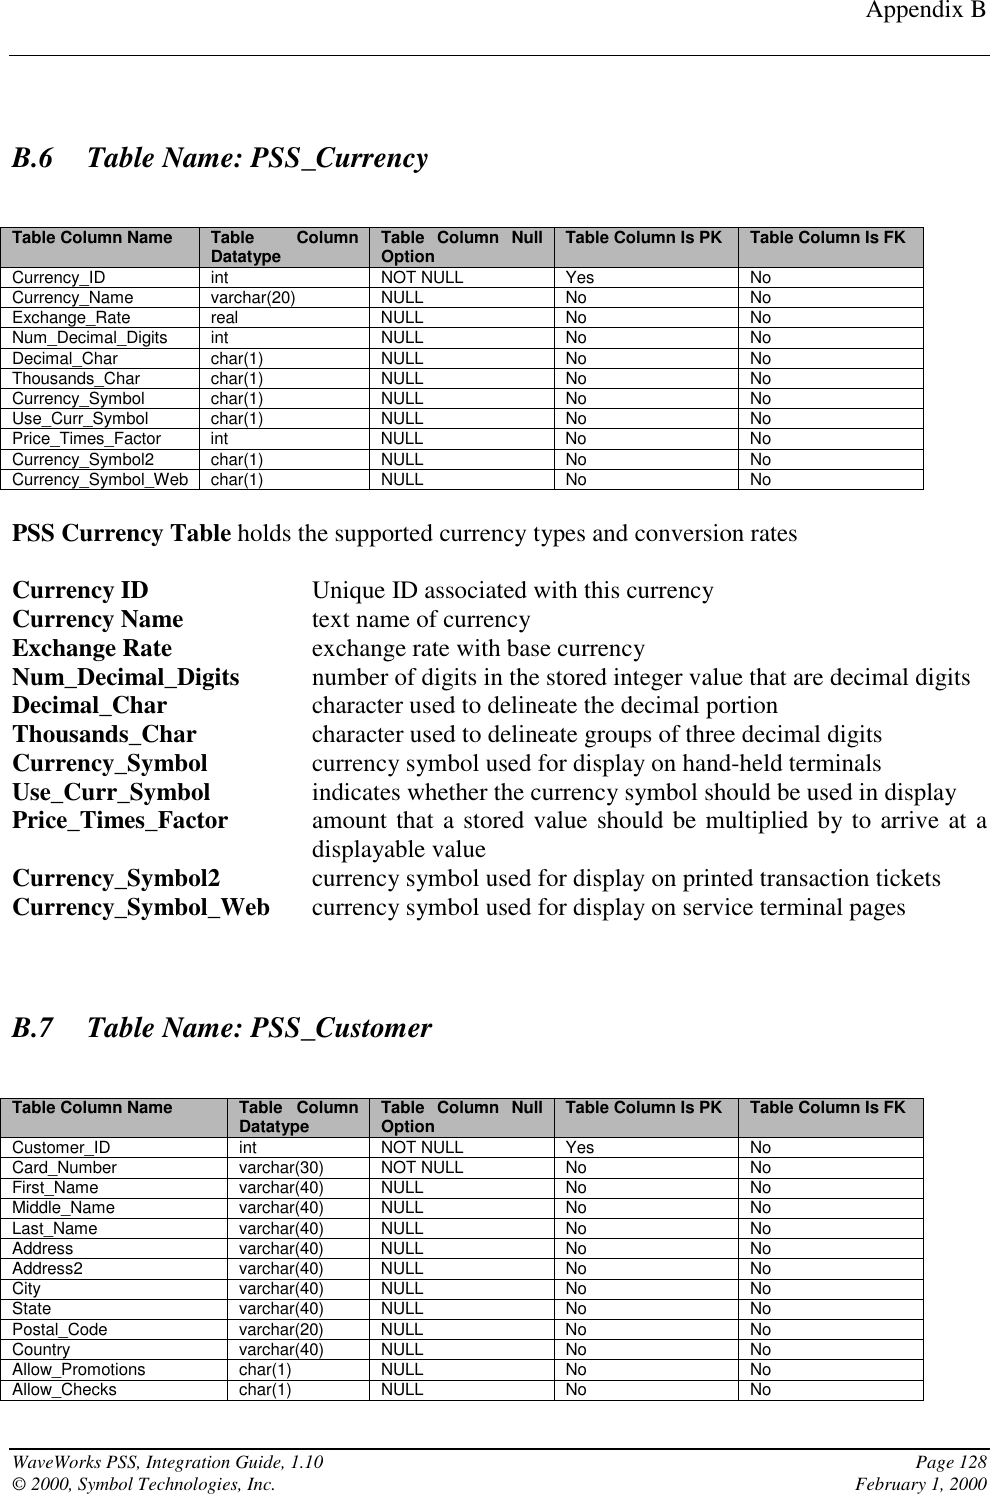 Appendix BWaveWorks PSS, Integration Guide, 1.10 Page 128© 2000, Symbol Technologies, Inc. February 1, 2000B.6 Table Name: PSS_CurrencyTable Column Name Table ColumnDatatype Table Column NullOption Table Column Is PK Table Column Is FKCurrency_ID int NOT NULL Yes NoCurrency_Name varchar(20) NULL No NoExchange_Rate real NULL No NoNum_Decimal_Digits int NULL No NoDecimal_Char char(1) NULL No NoThousands_Char char(1) NULL No NoCurrency_Symbol char(1) NULL No NoUse_Curr_Symbol char(1) NULL No NoPrice_Times_Factor int NULL No NoCurrency_Symbol2 char(1) NULL No NoCurrency_Symbol_Web char(1) NULL No NoPSS Currency Table holds the supported currency types and conversion ratesCurrency ID  Unique ID associated with this currencyCurrency Name text name of currencyExchange Rate  exchange rate with base currencyNum_Decimal_Digits  number of digits in the stored integer value that are decimal digitsDecimal_Char  character used to delineate the decimal portionThousands_Char  character used to delineate groups of three decimal digitsCurrency_Symbol  currency symbol used for display on hand-held terminalsUse_Curr_Symbol  indicates whether the currency symbol should be used in displayPrice_Times_Factor  amount that a stored value should be multiplied by to arrive at adisplayable valueCurrency_Symbol2 currency symbol used for display on printed transaction ticketsCurrency_Symbol_Web currency symbol used for display on service terminal pagesB.7 Table Name: PSS_CustomerTable Column Name Table ColumnDatatype Table Column NullOption Table Column Is PK Table Column Is FKCustomer_ID int NOT NULL Yes NoCard_Number varchar(30) NOT NULL No NoFirst_Name varchar(40) NULL No NoMiddle_Name varchar(40) NULL No NoLast_Name varchar(40) NULL No NoAddress varchar(40) NULL No NoAddress2 varchar(40) NULL No NoCity varchar(40) NULL No NoState varchar(40) NULL No NoPostal_Code varchar(20) NULL No NoCountry varchar(40) NULL No NoAllow_Promotions char(1) NULL No NoAllow_Checks char(1) NULL No No